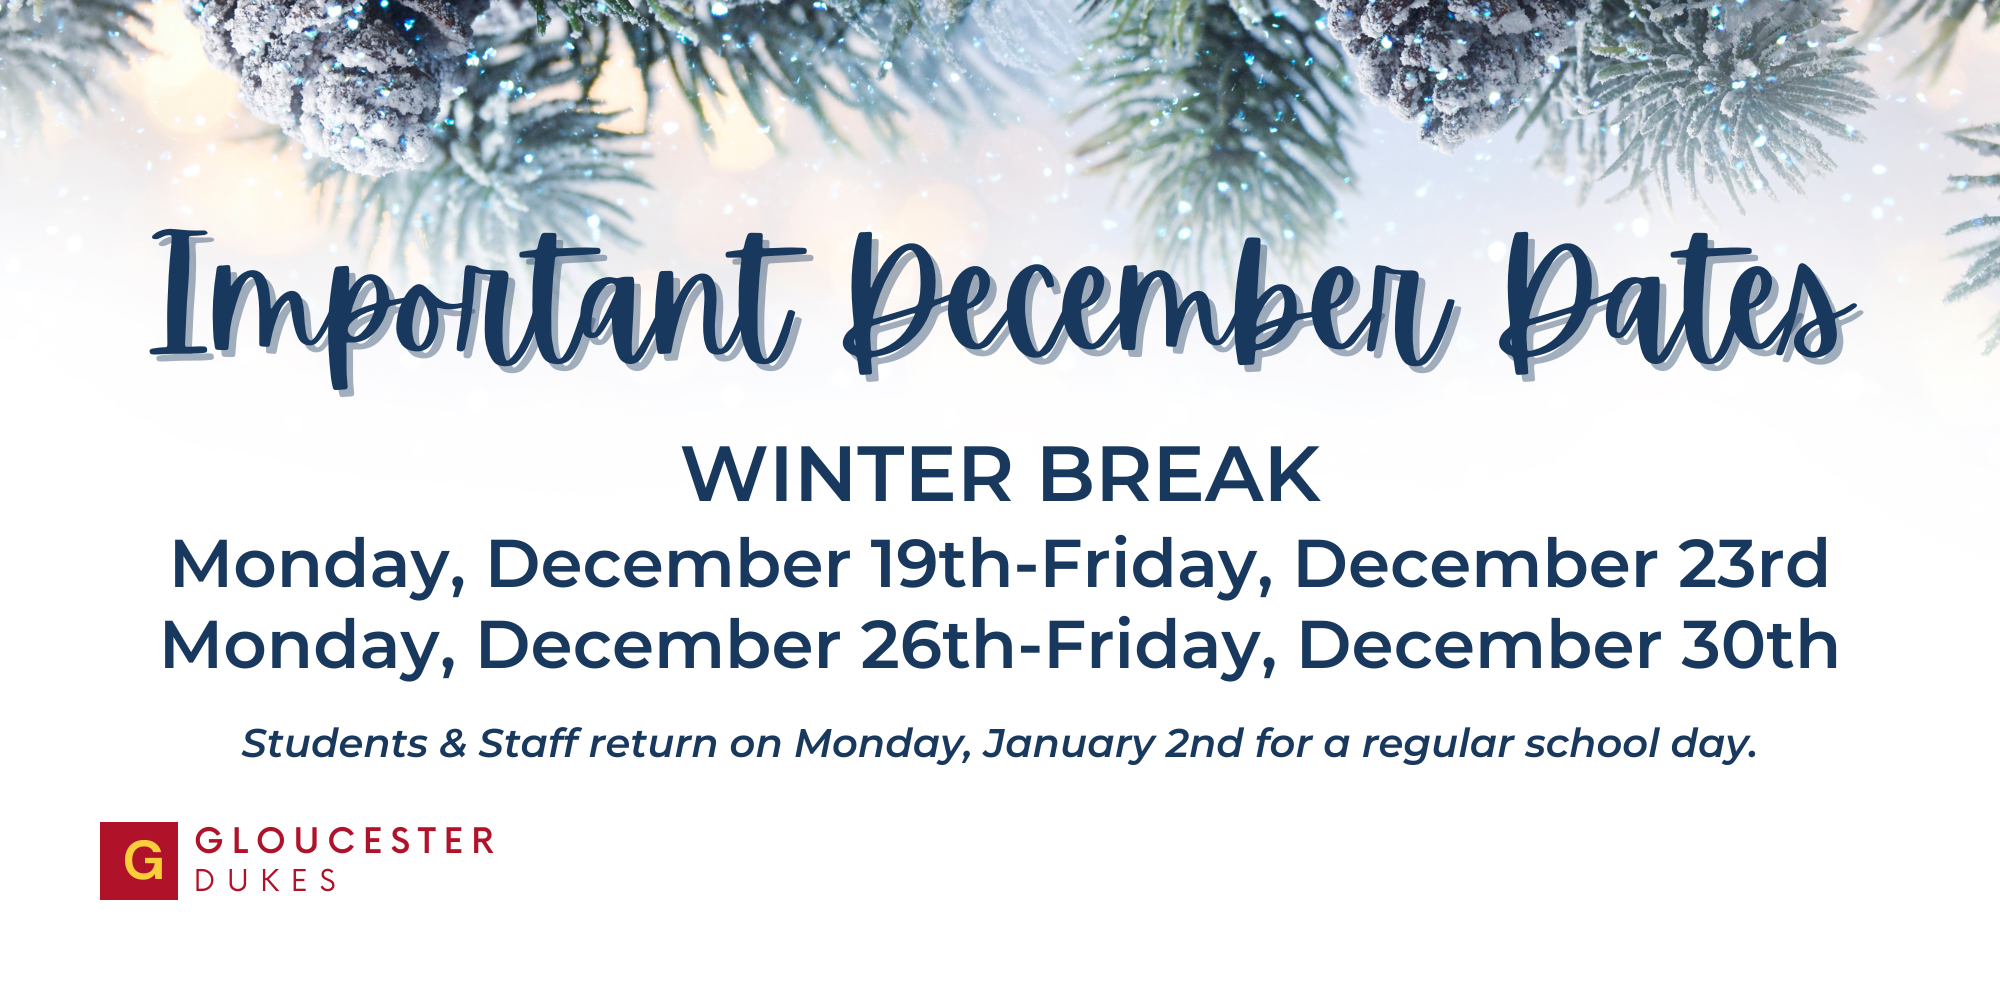 Important December Dates  Winter Break is Monday, December 19th to Friday, December 23rd and Monday, December 26th-Friday, December 30th Students and staff return on Monday, January, 2nd for a regular school day.